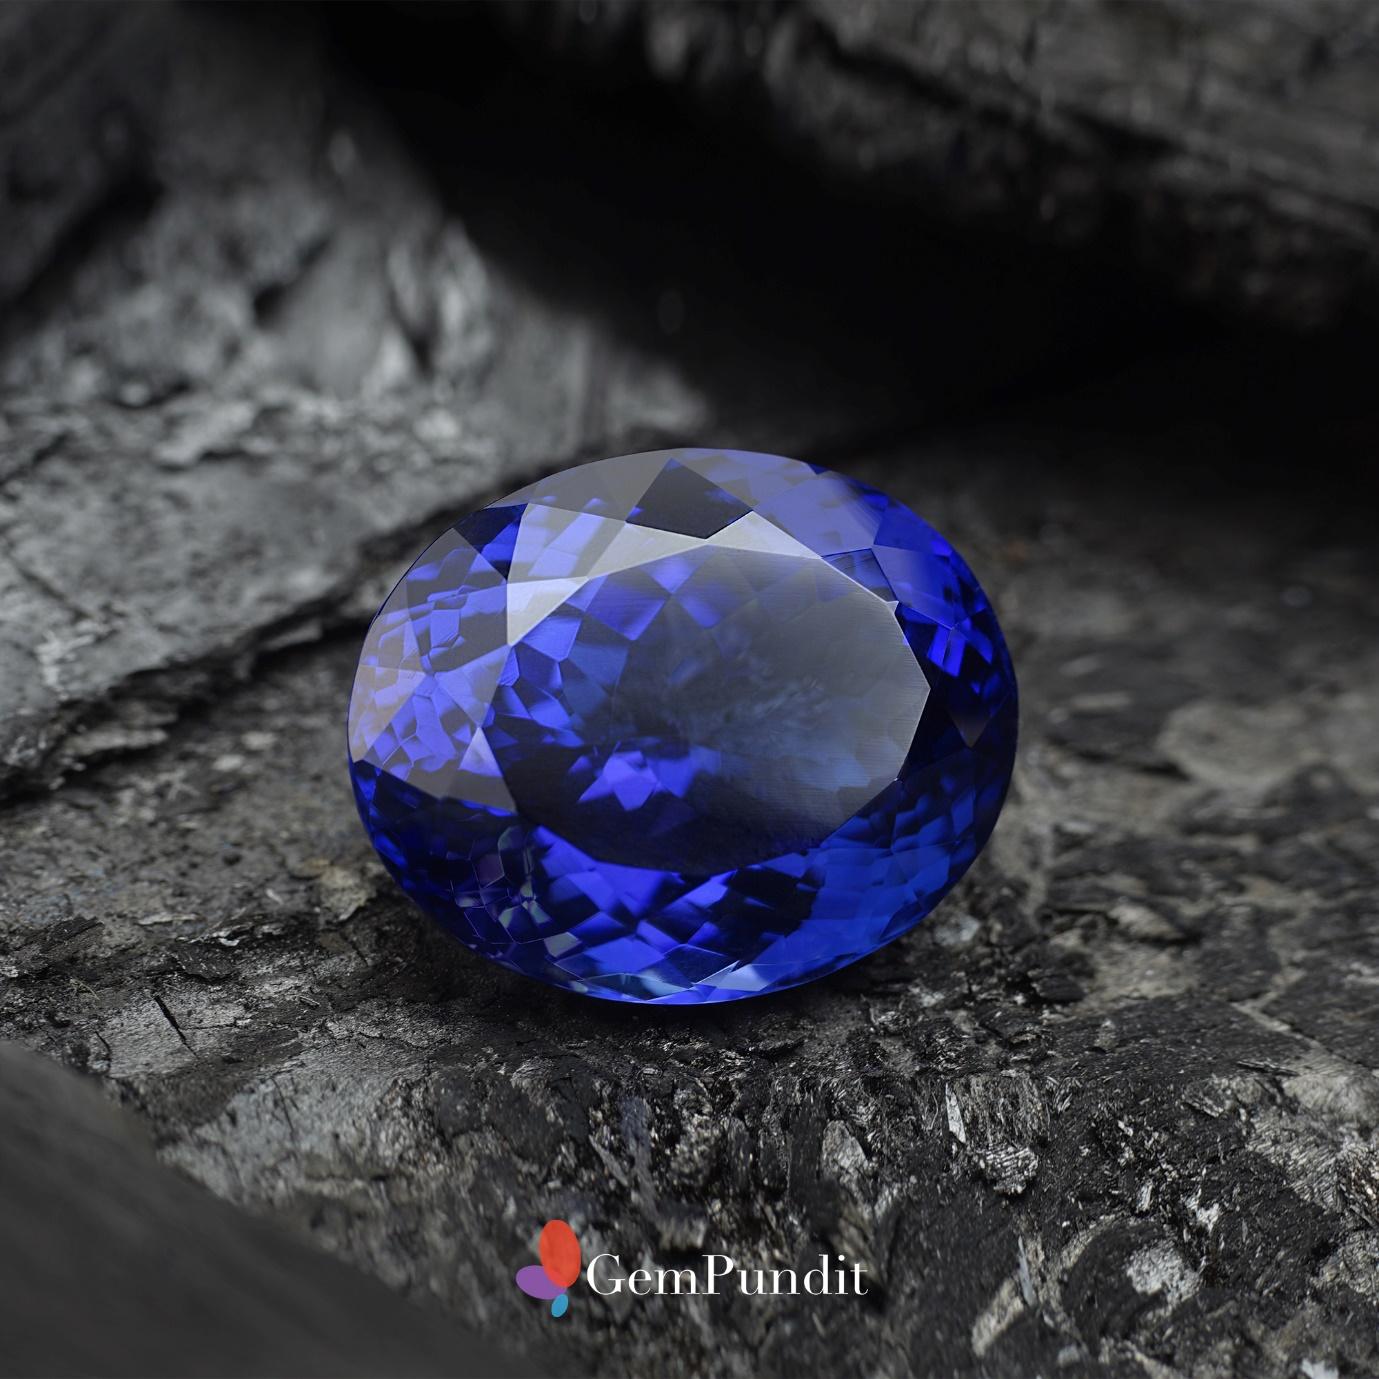 What are the benefits of wearing a neelam blue sapphire ring? - Quora